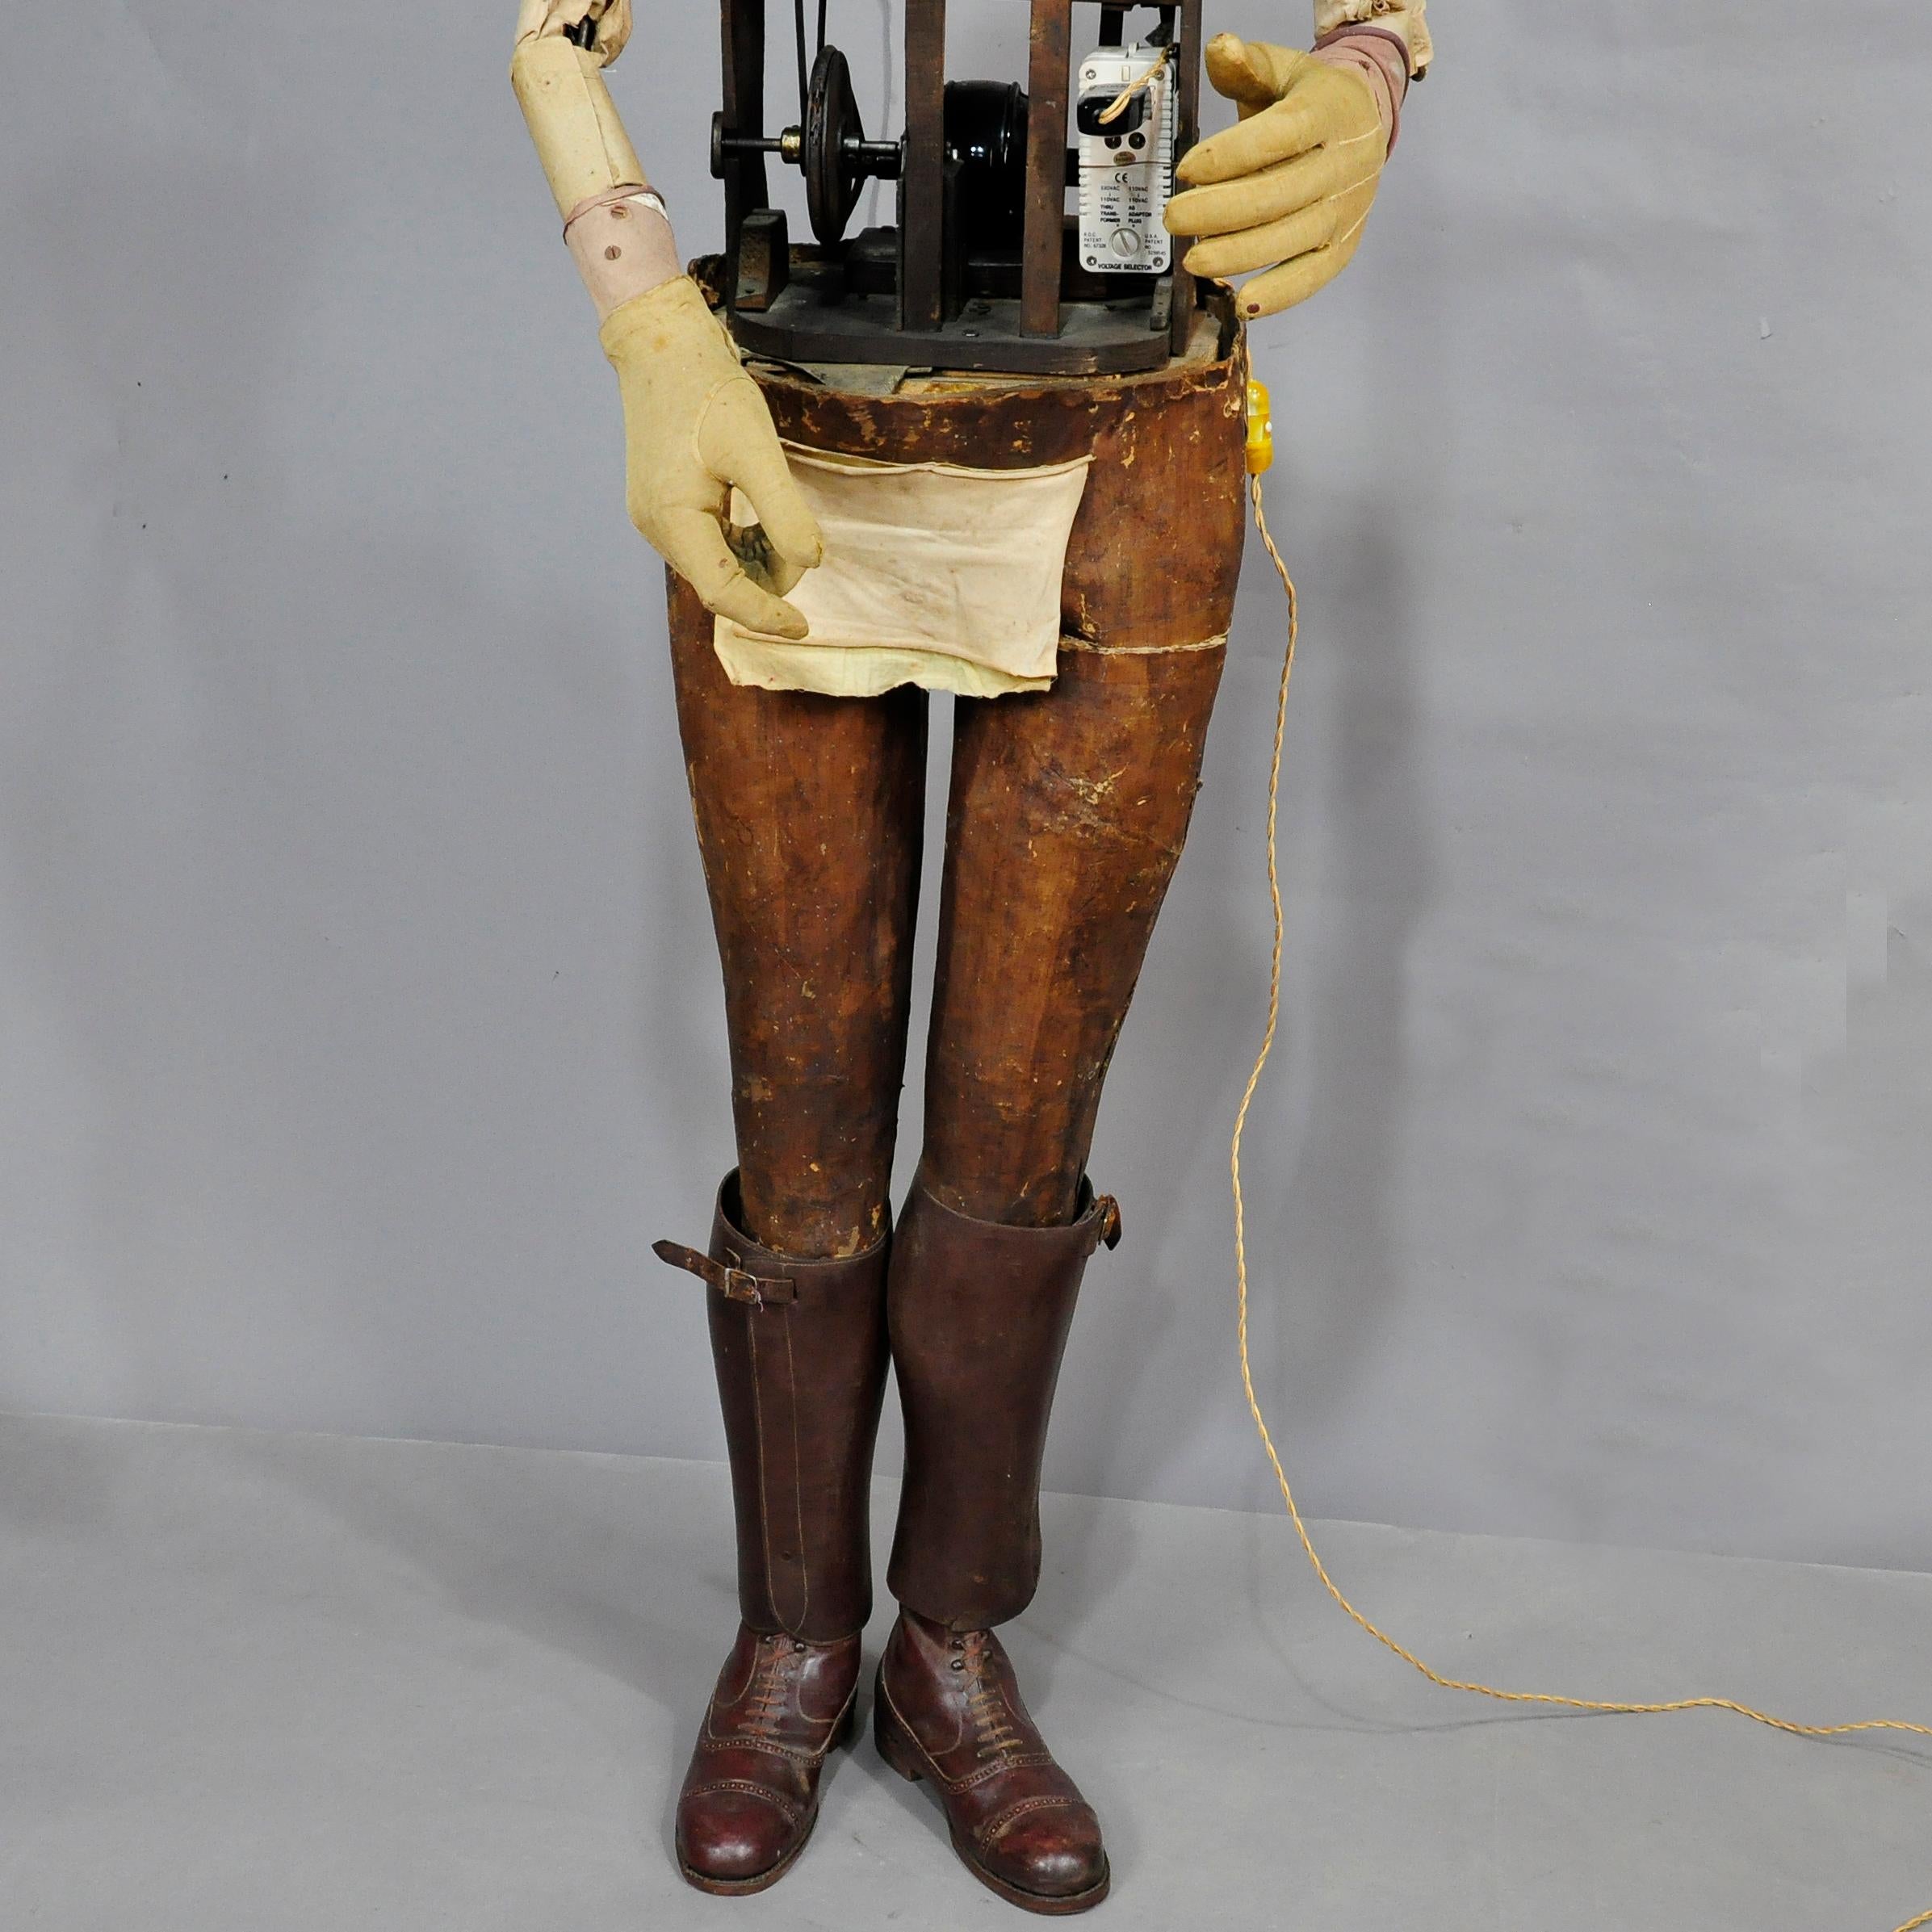 Wood The Enchanting Tale of a Rare Antique Electric Bellboy Display Automaton ca 1870